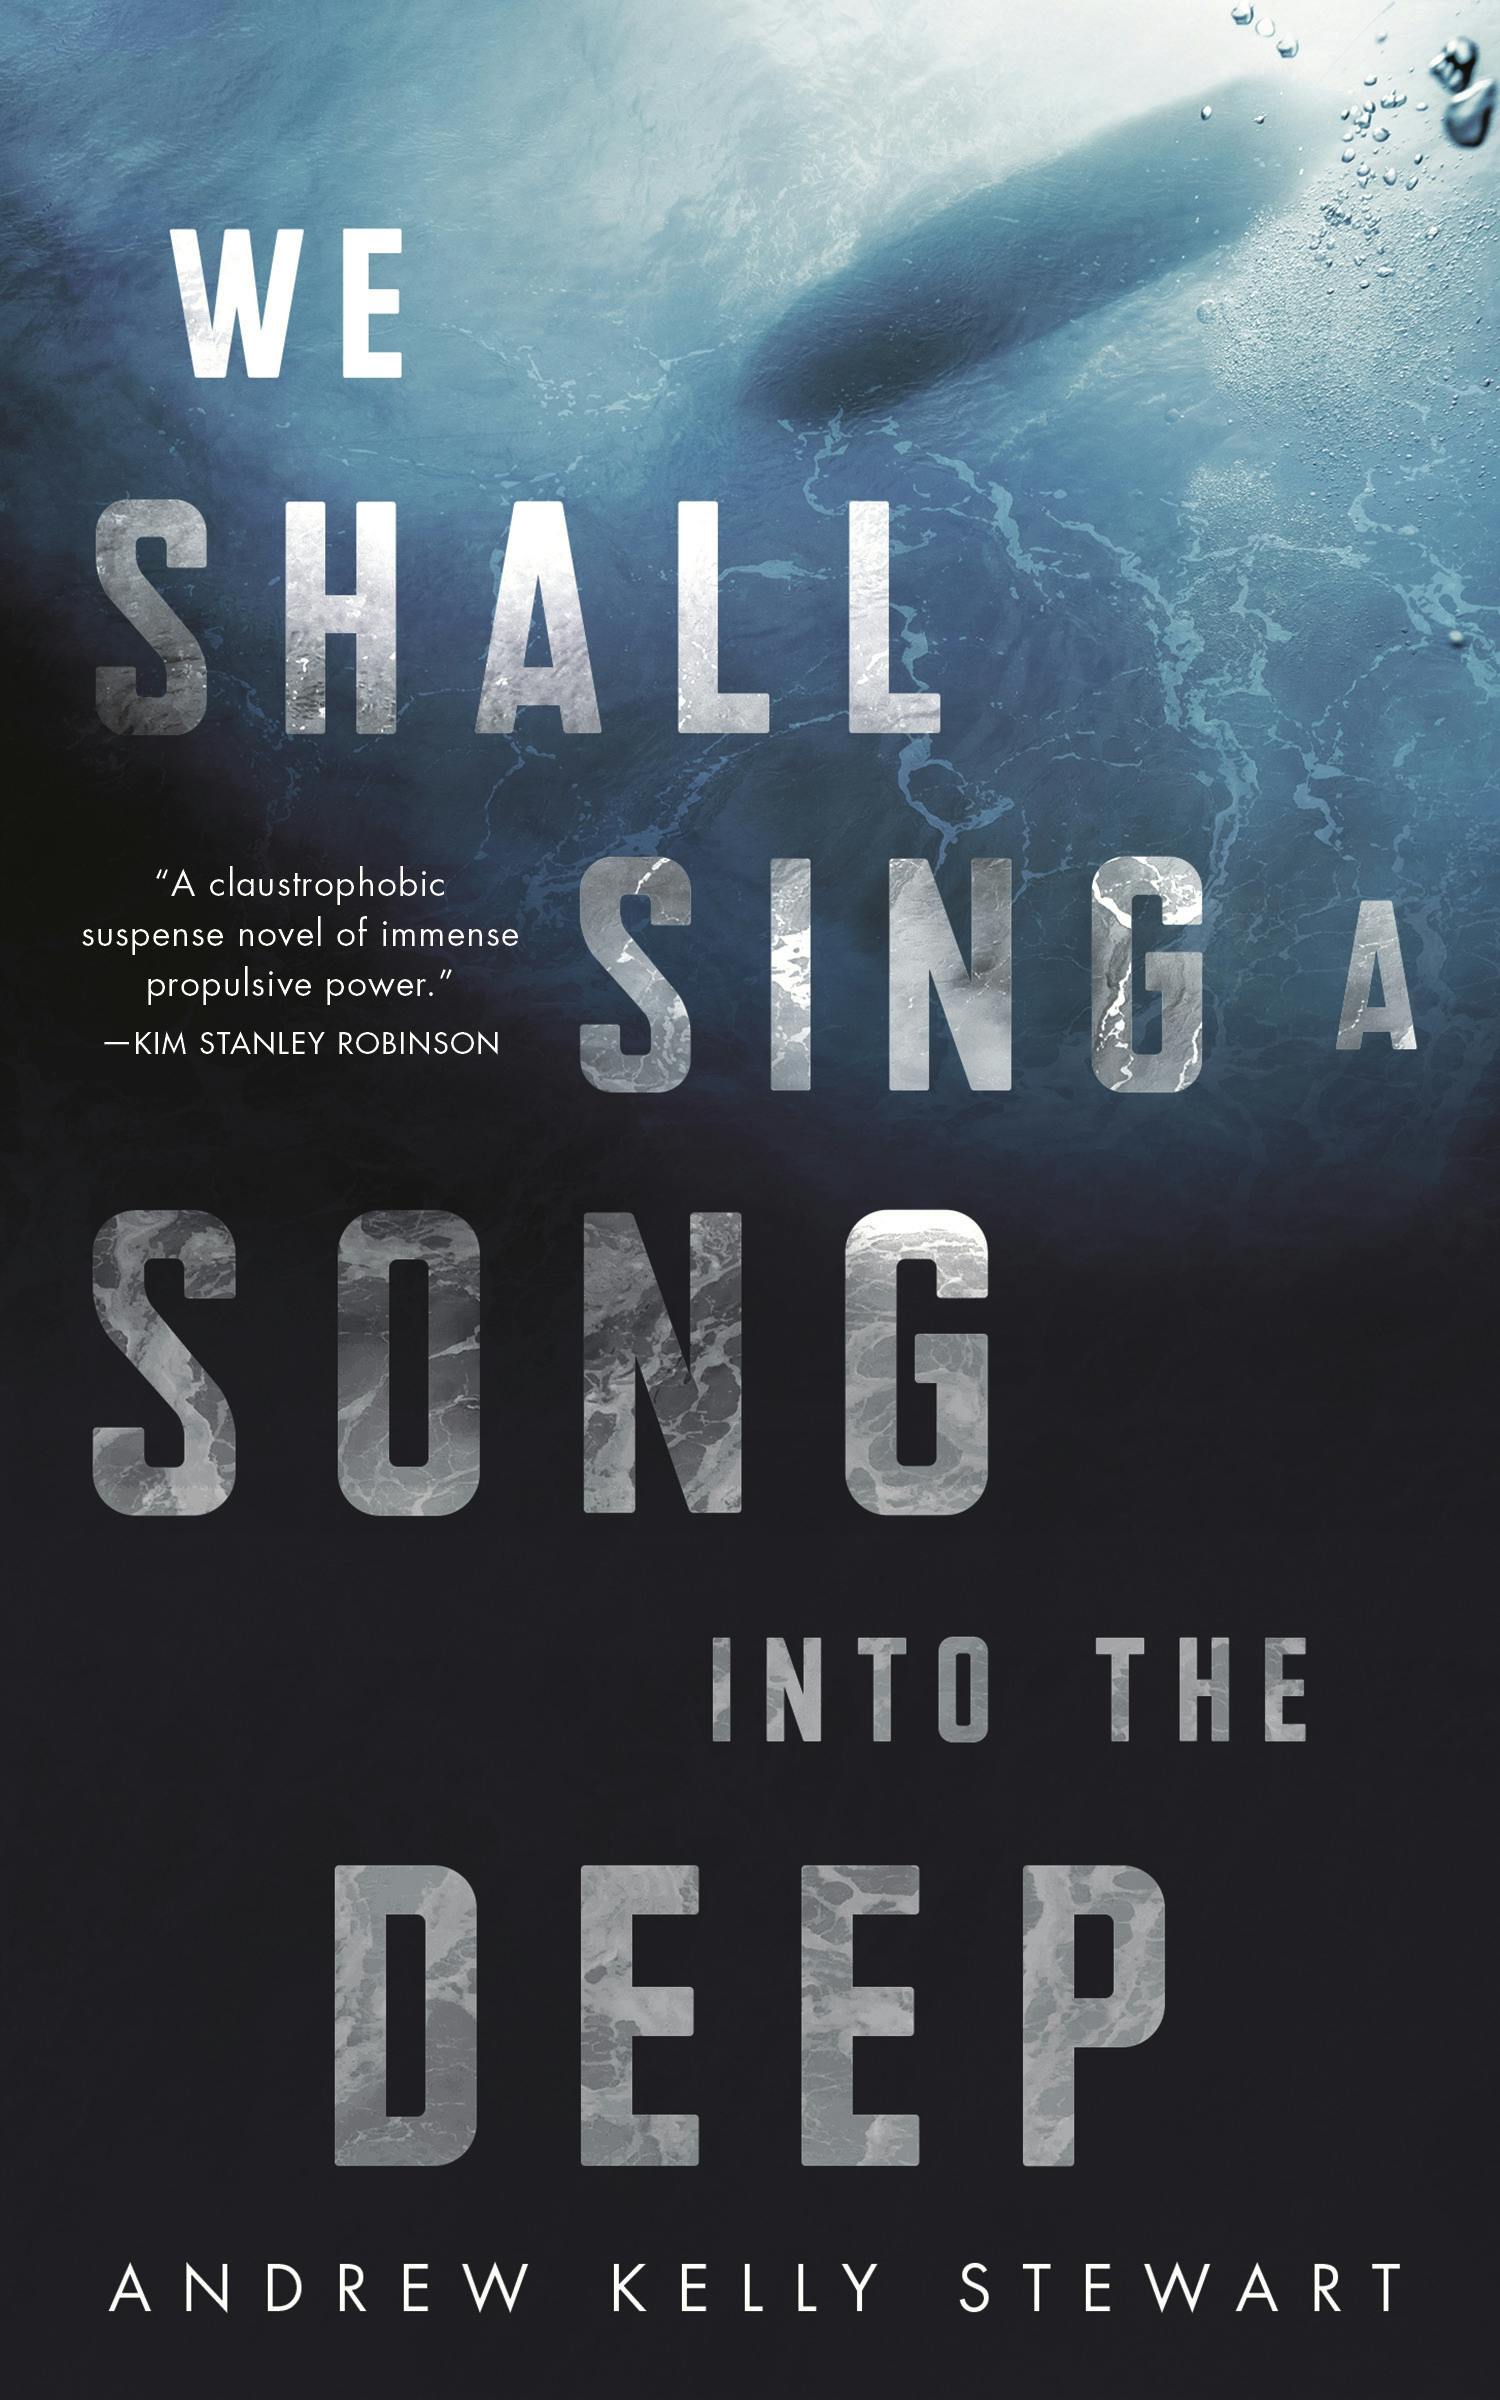 Cover for the book titled as: We Shall Sing a Song into the Deep